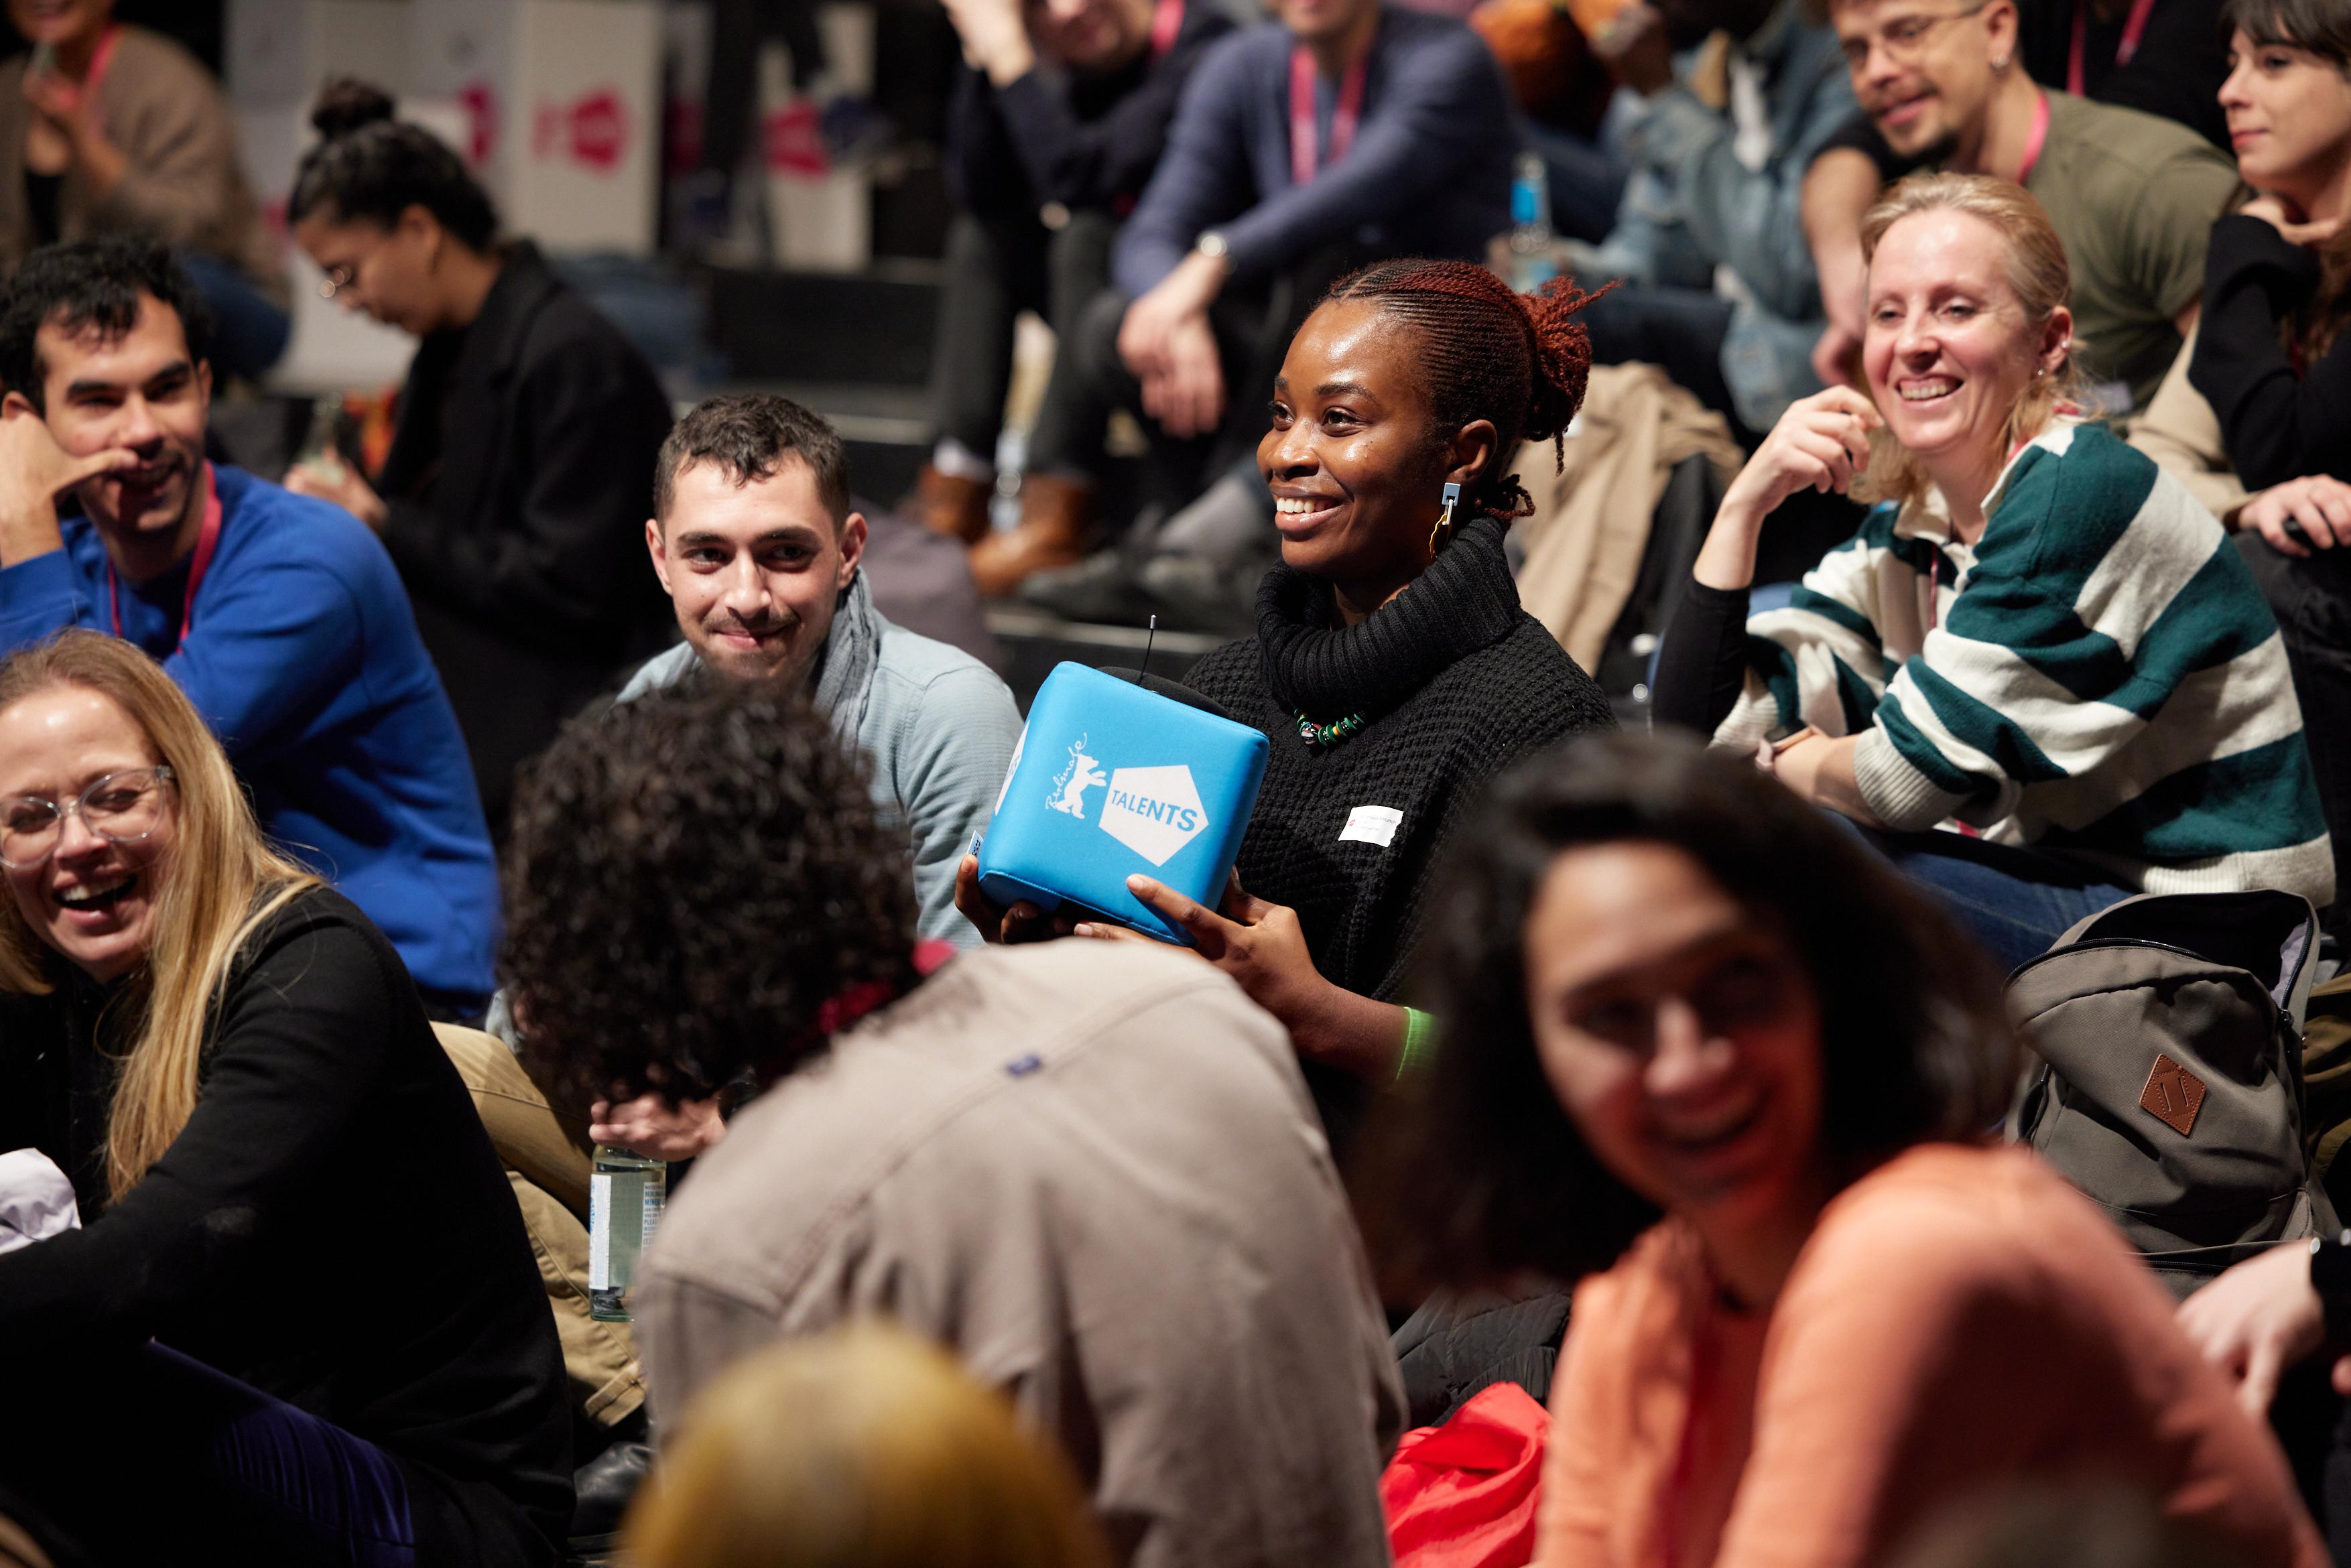 Several young people are sitting on chairs. One person in the middle is holding a blue, cube-shaped loudspeaker with "Berlinale Talents" printed on it.